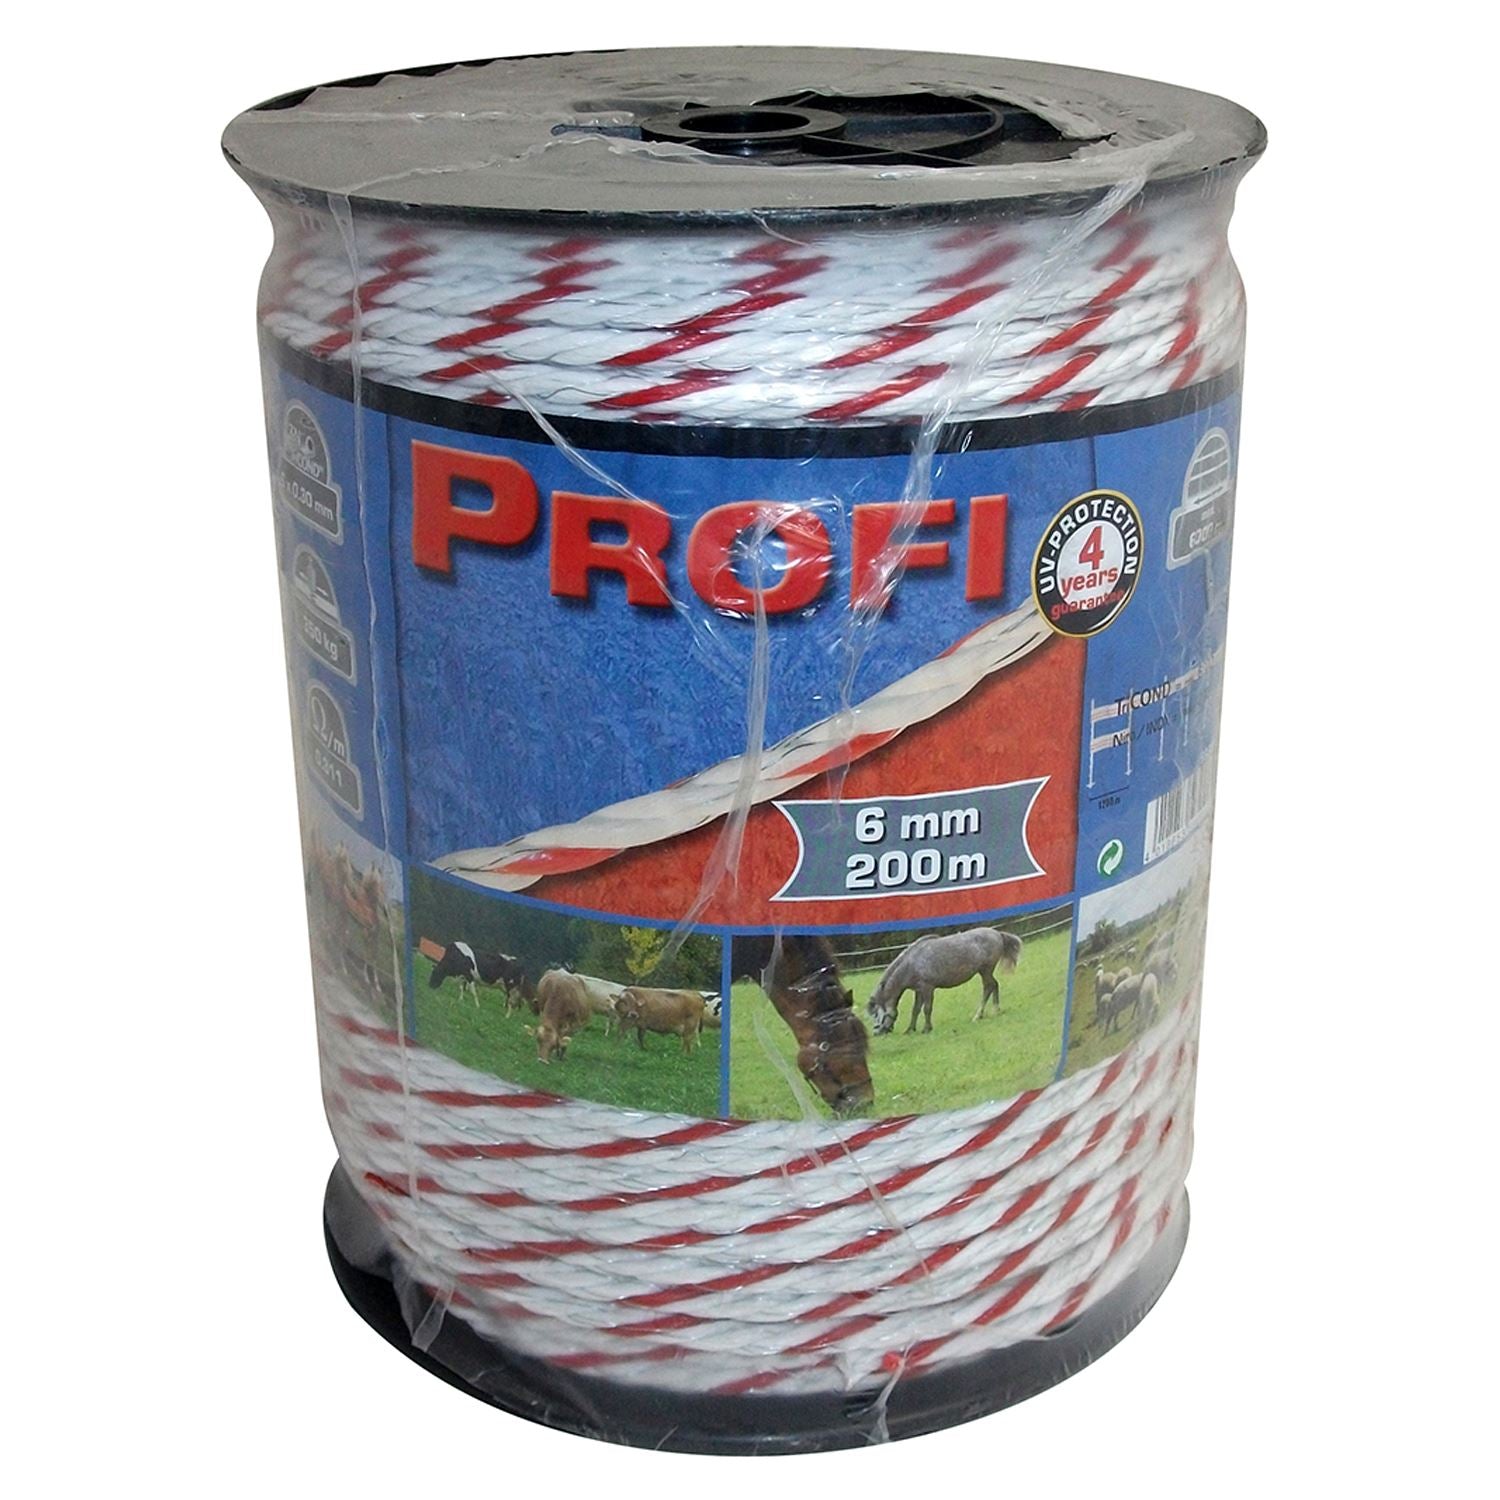 Corral Profi Fencing Rope - Just Horse Riders